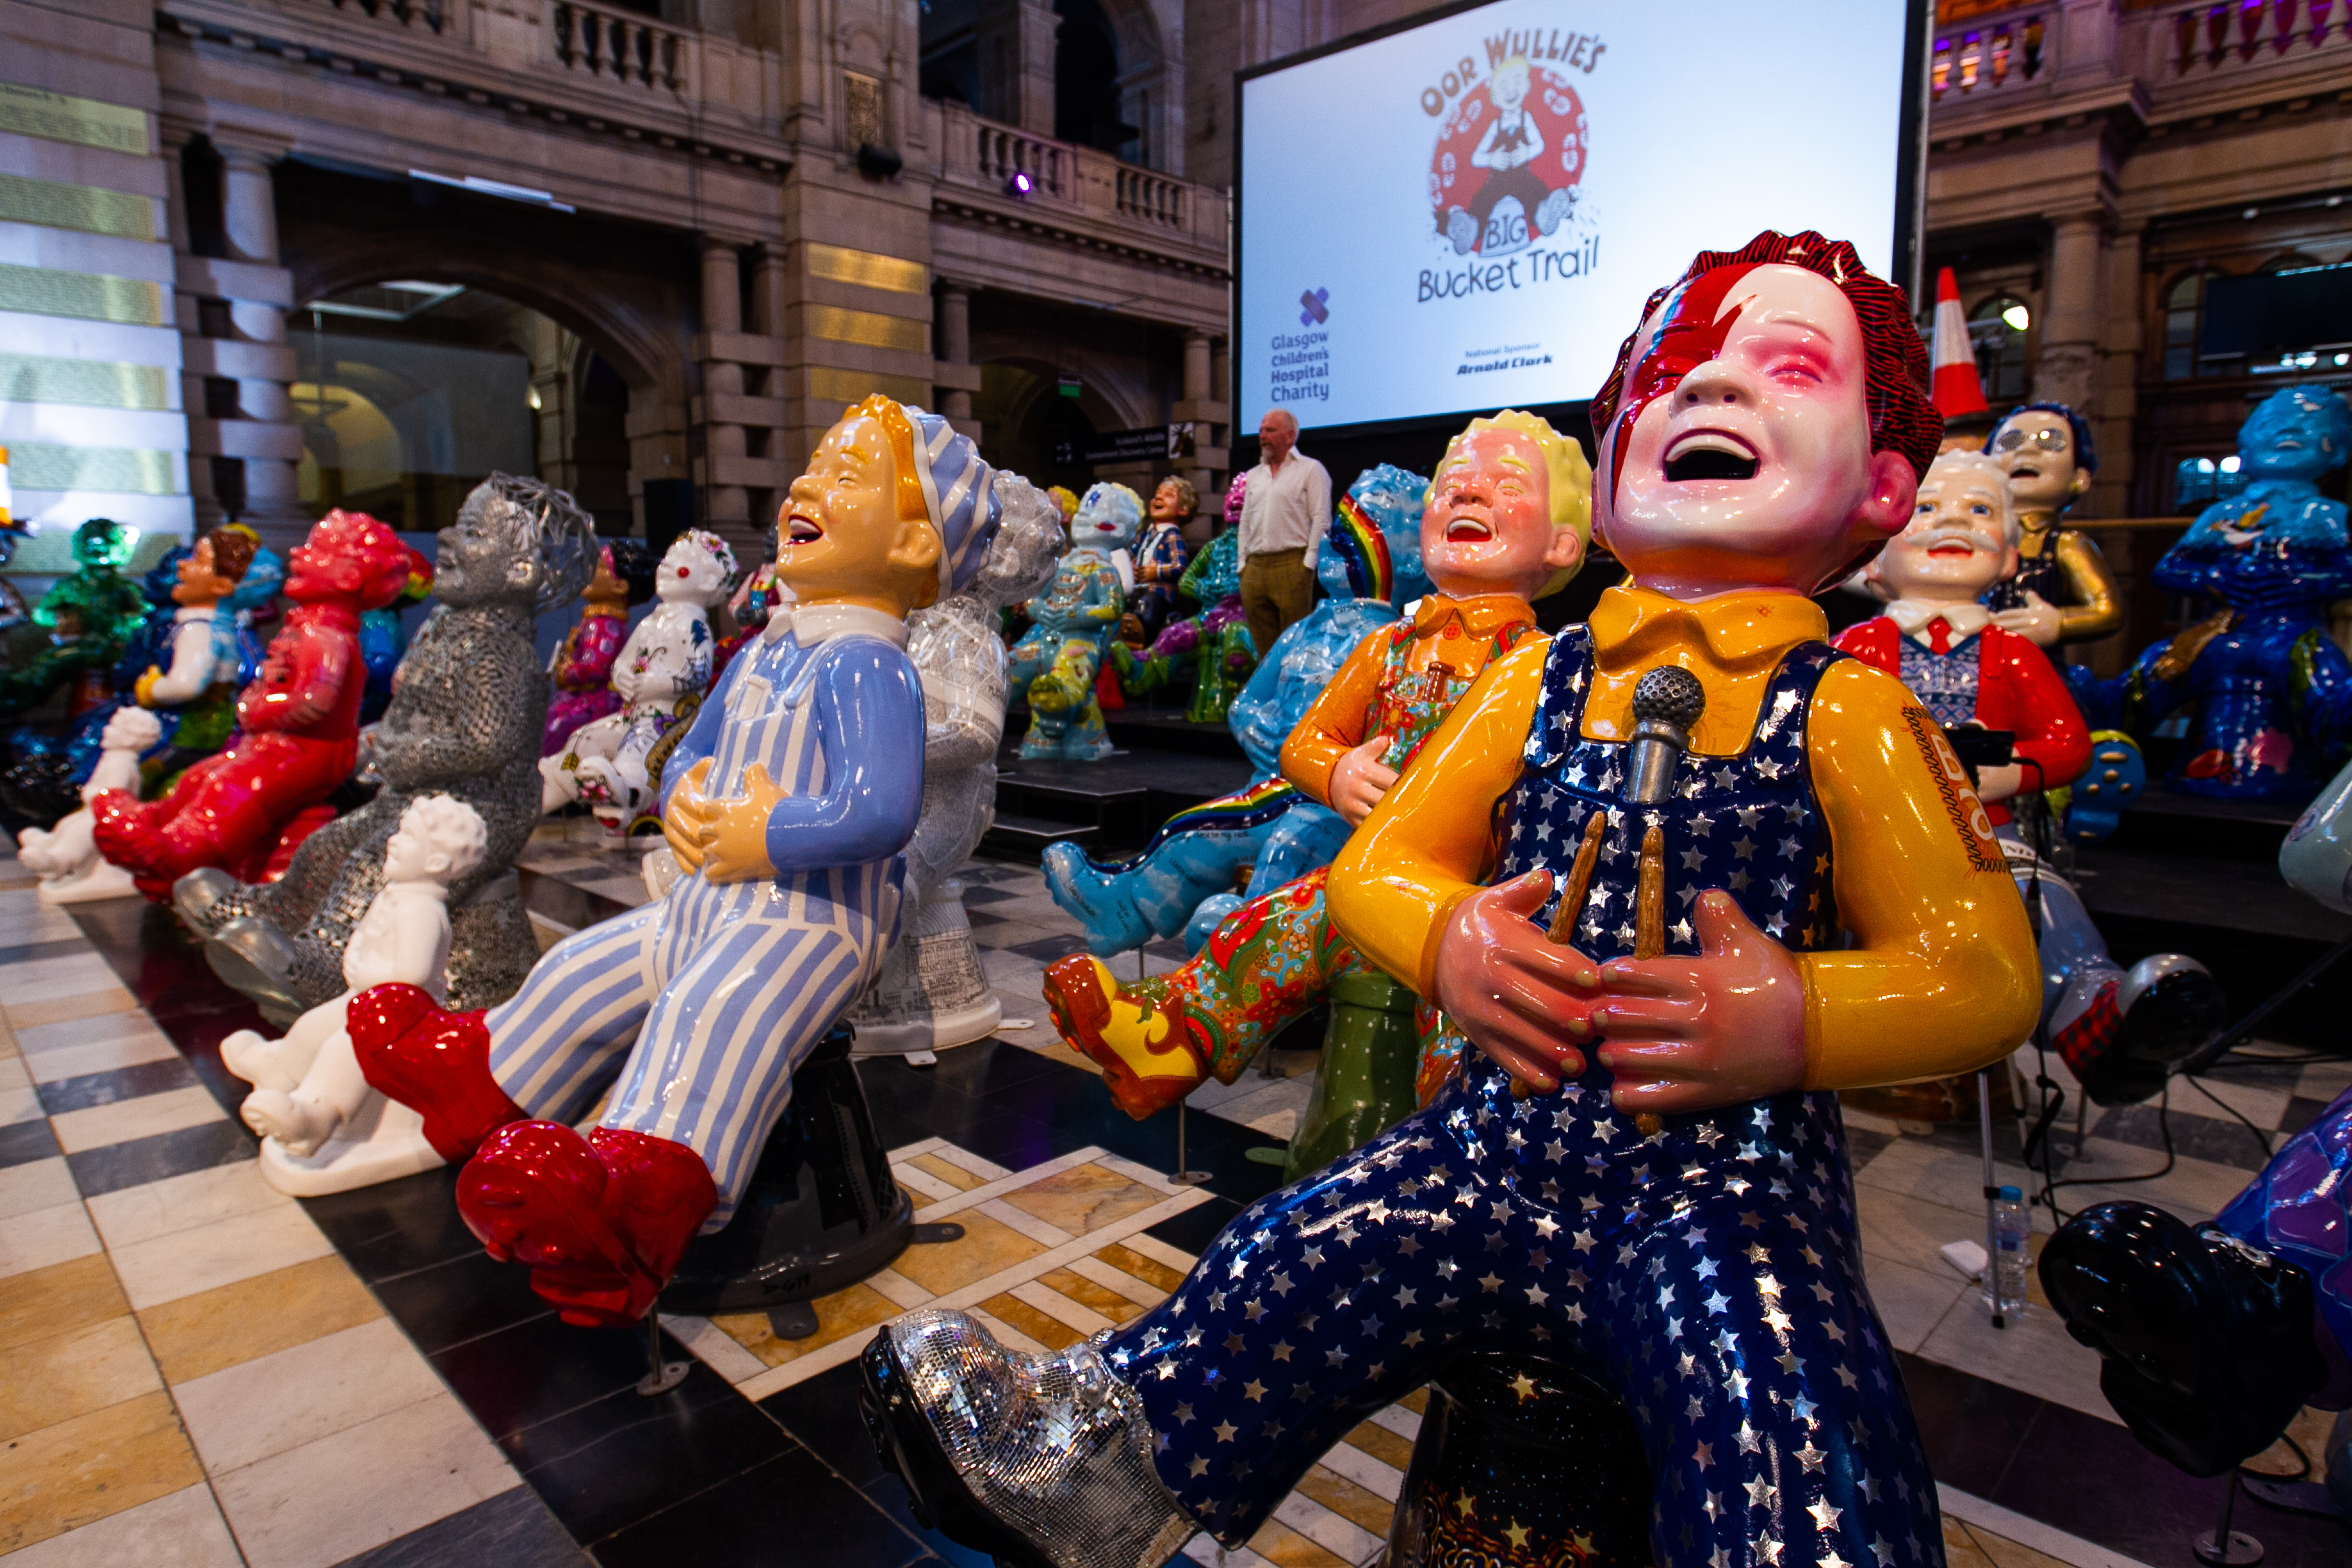 The Oor Wullie Bucket Trail auction at the Kelvingrove Art Gallery in Glasgow.